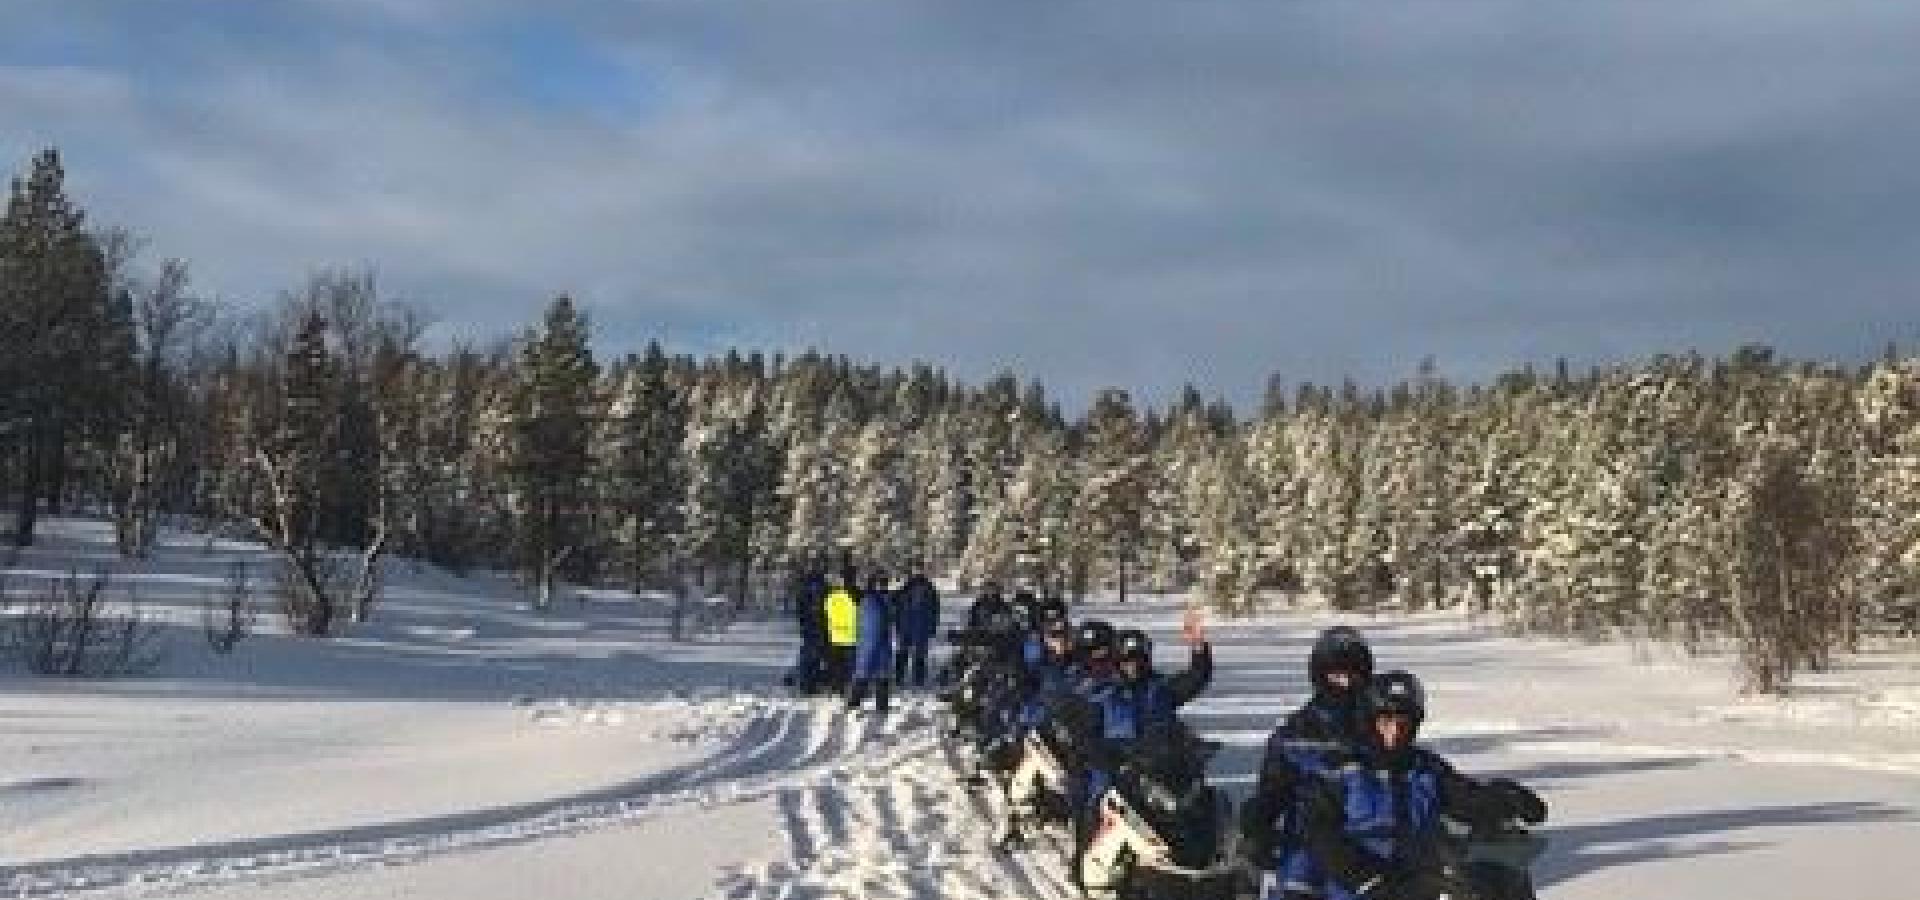 Winter activities in Skibotn - Snowmobile in the morning and dog sledding in the evening